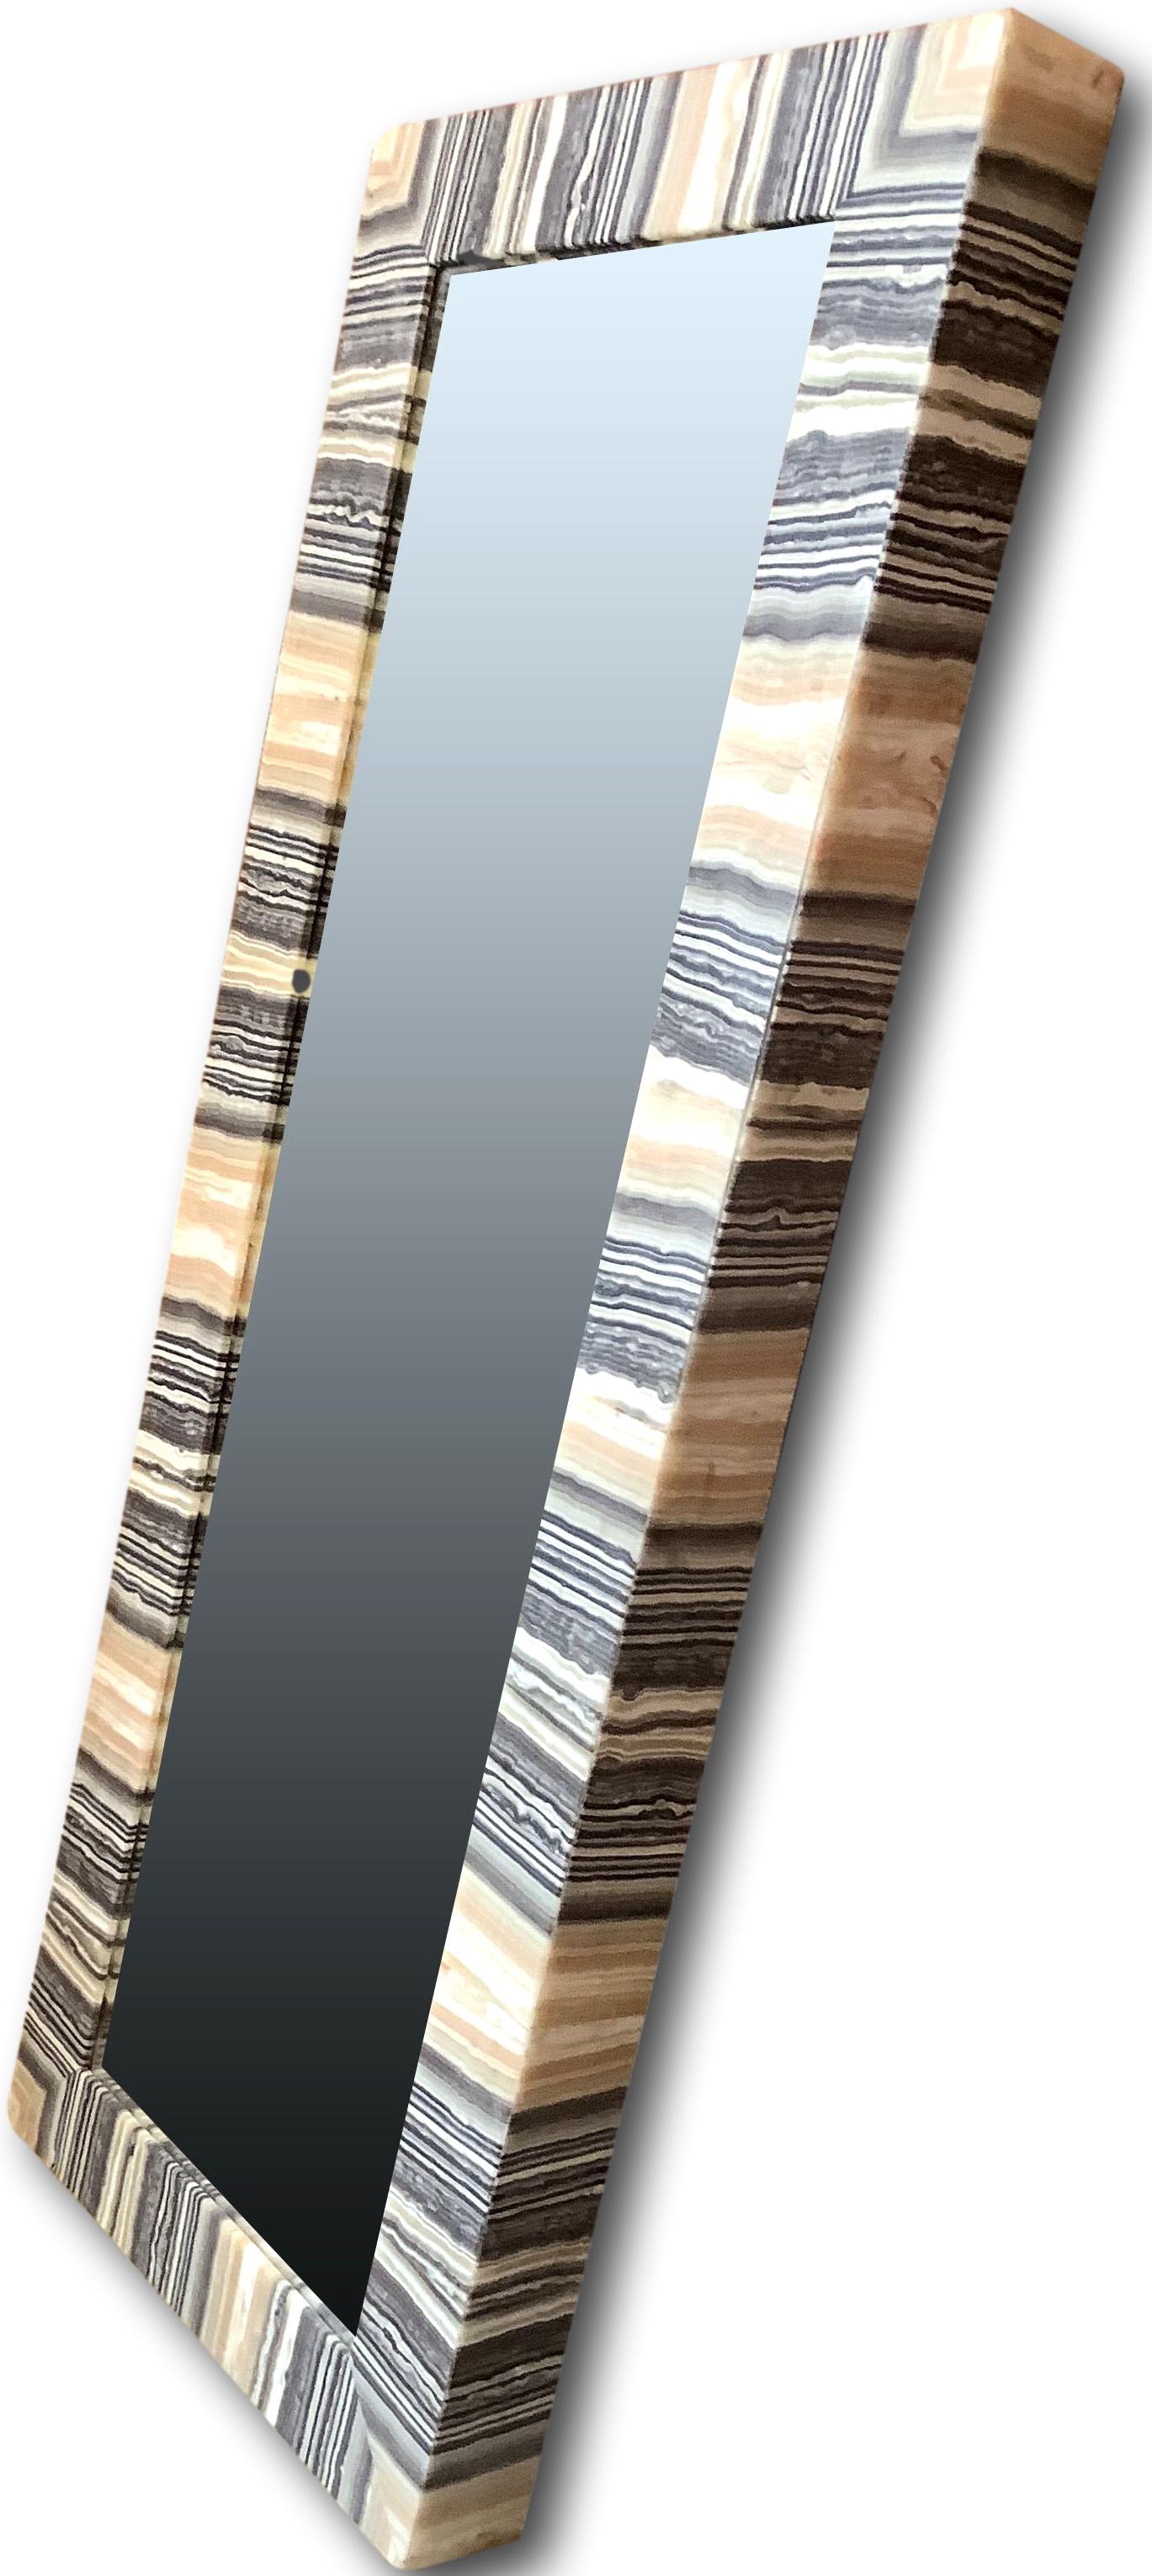 Mexican Striped Onyx Mirror For Sale